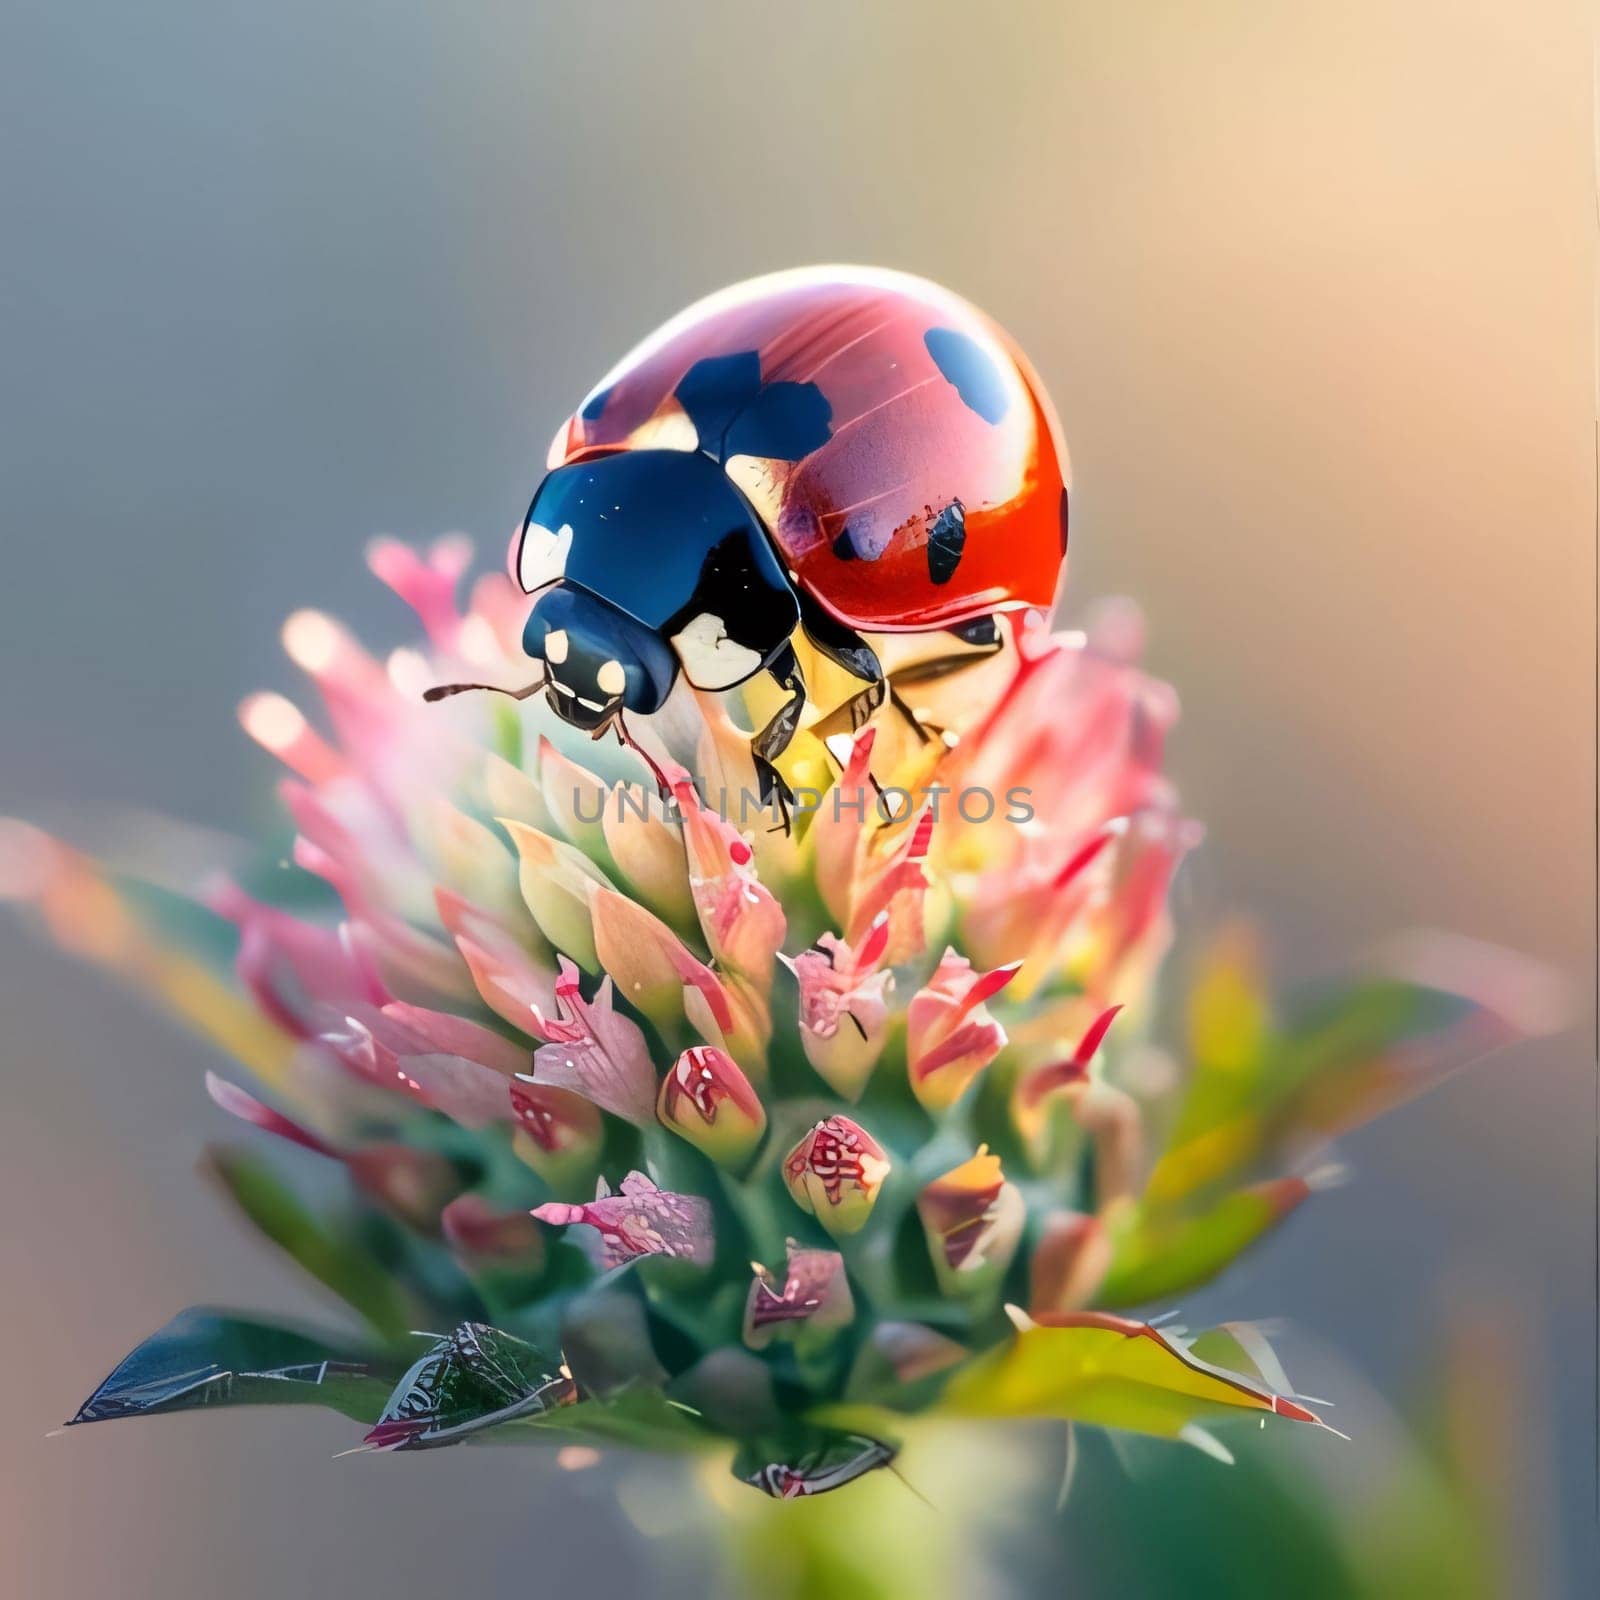 Red ladybug sitting on a flower, smudged background sunset rays. Close-up view. Flowering flowers, a symbol of spring, new life. by ThemesS